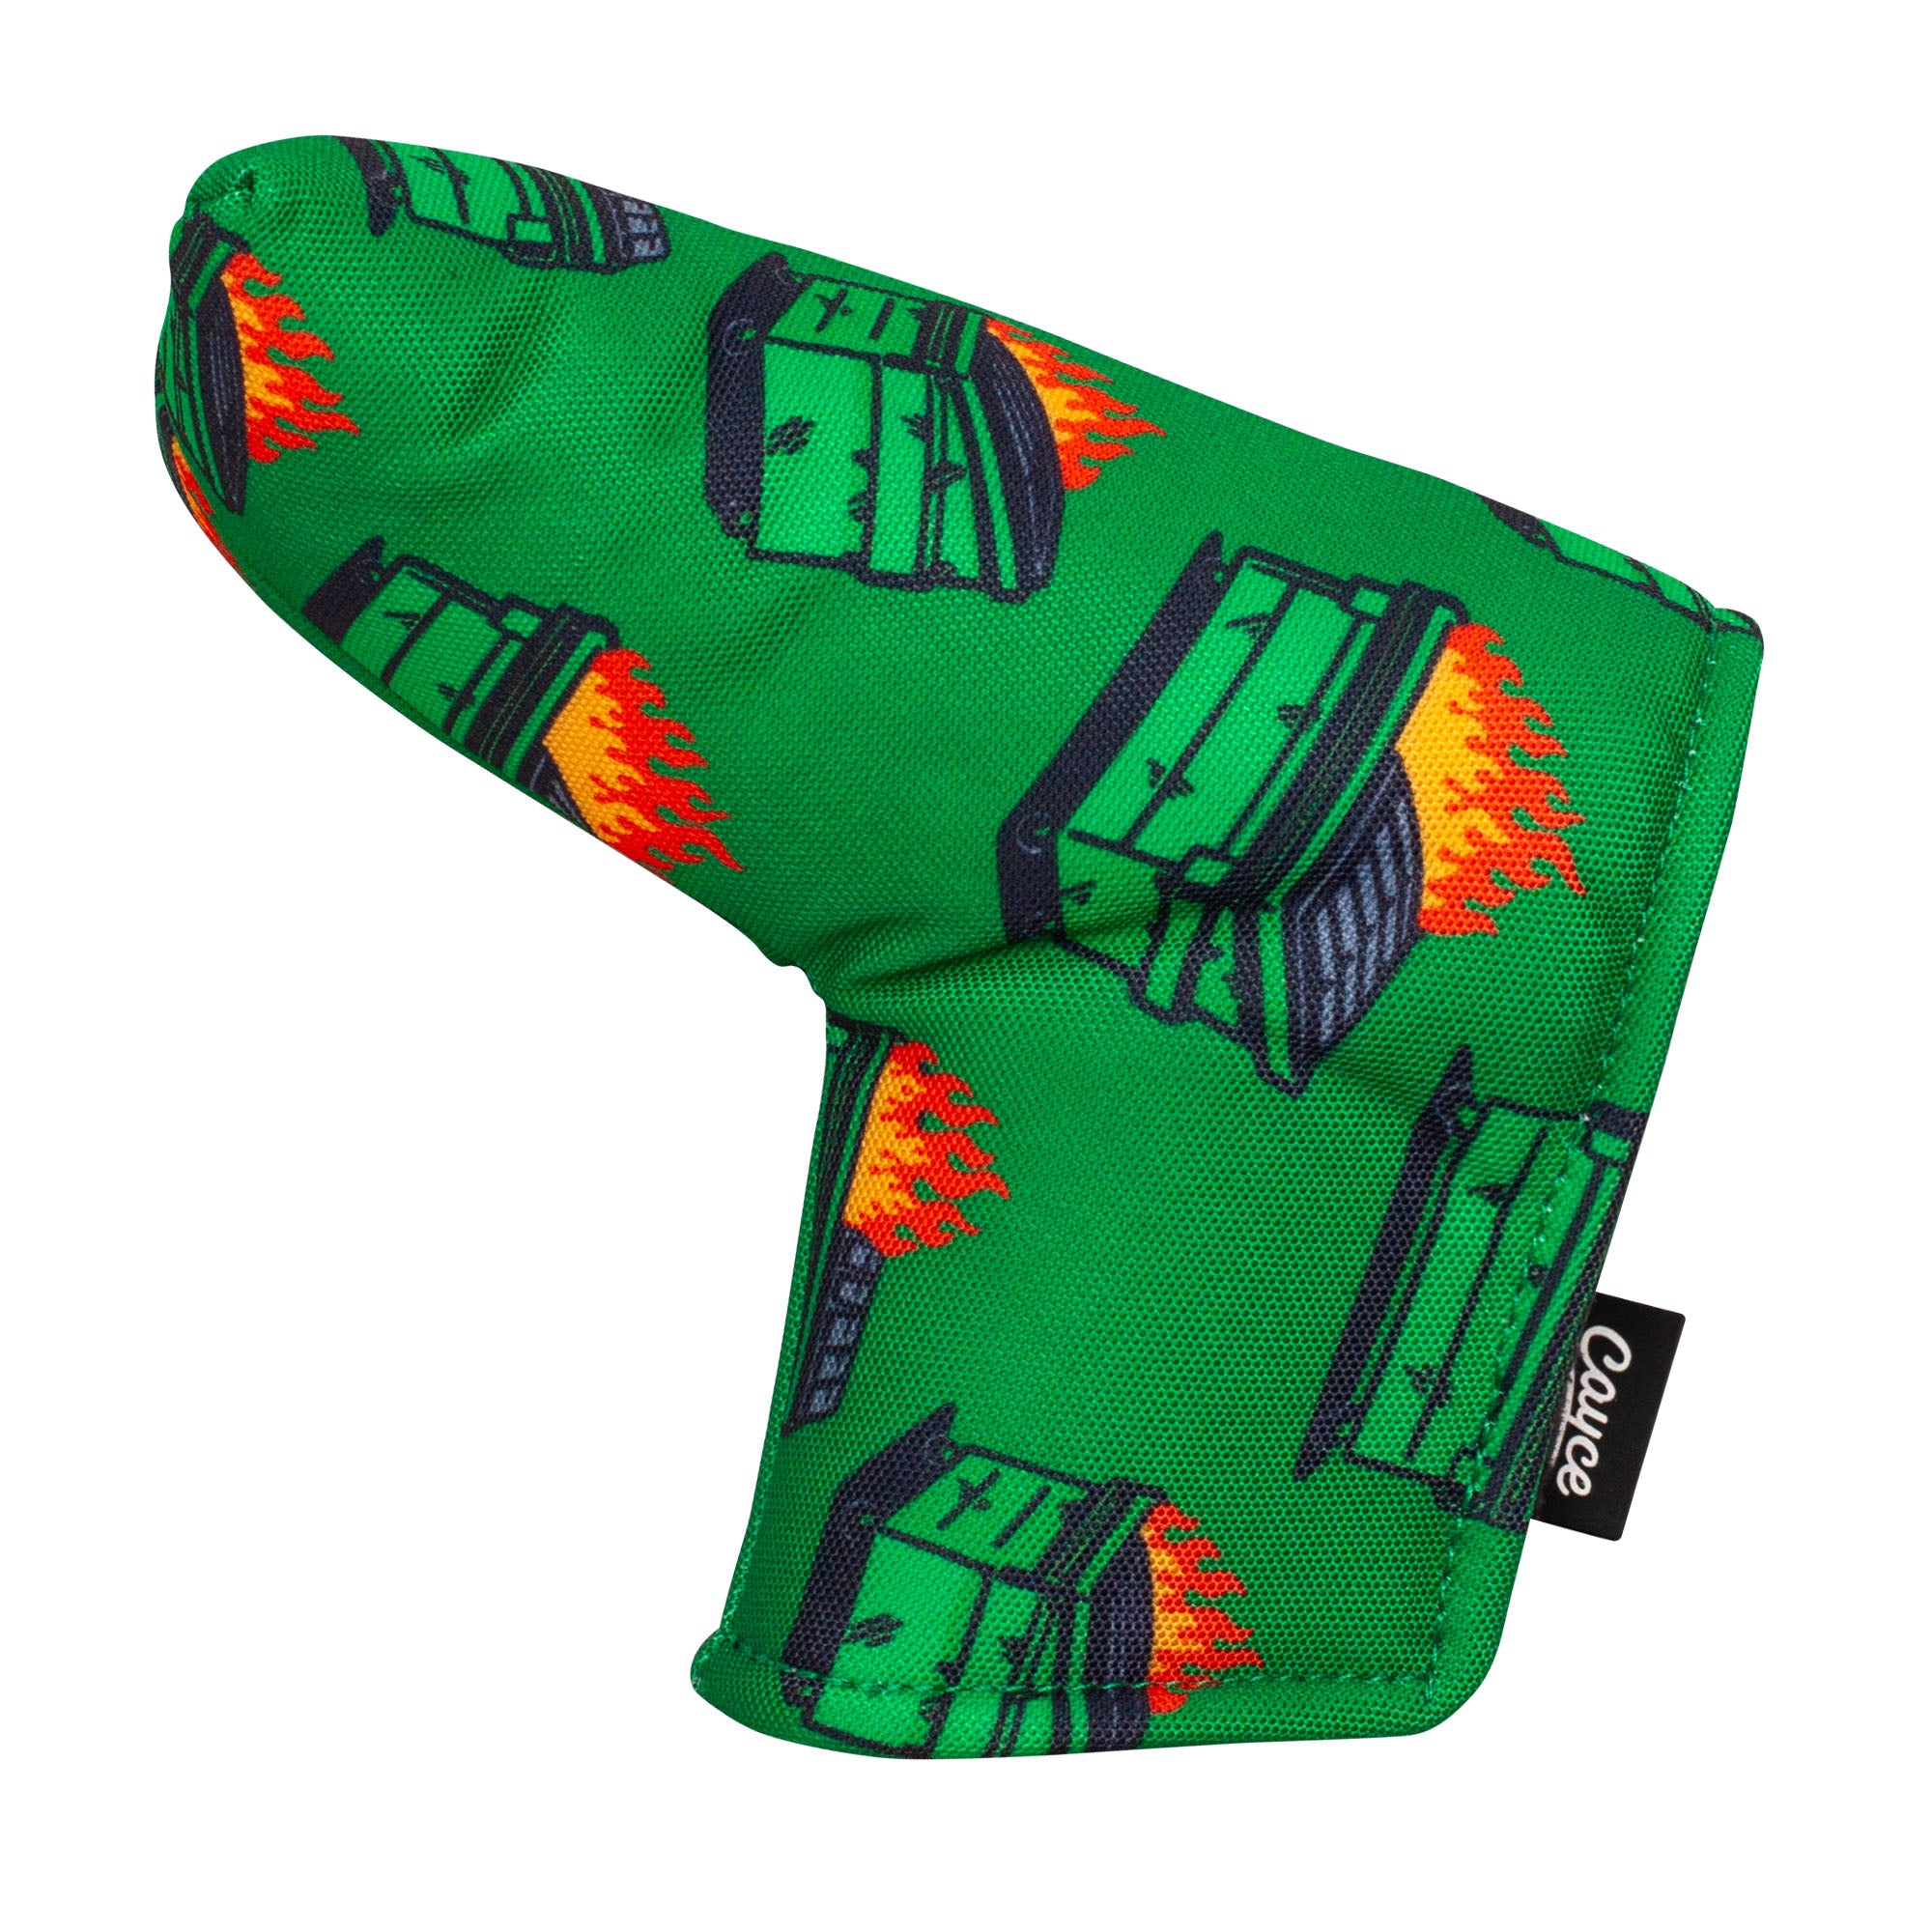 green golf putter cover with dancing dumpster fire pattern from Cayce Golf on a white background